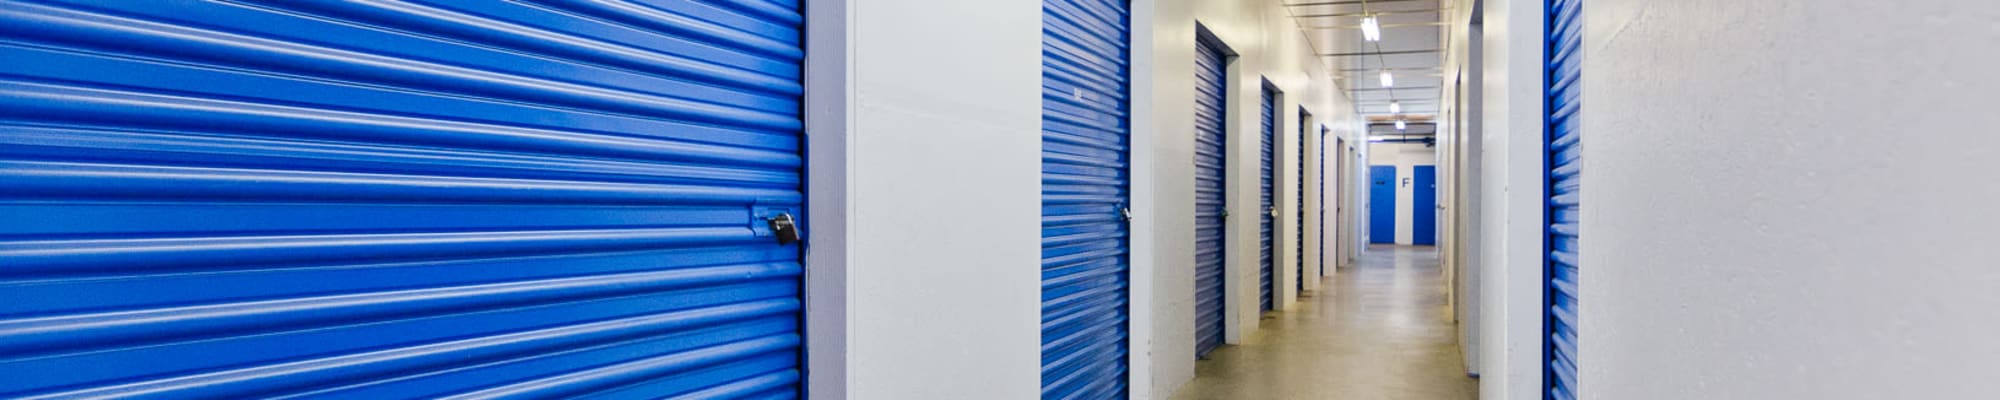 Contact Us at A-American Self Storage in Los Angeles, California